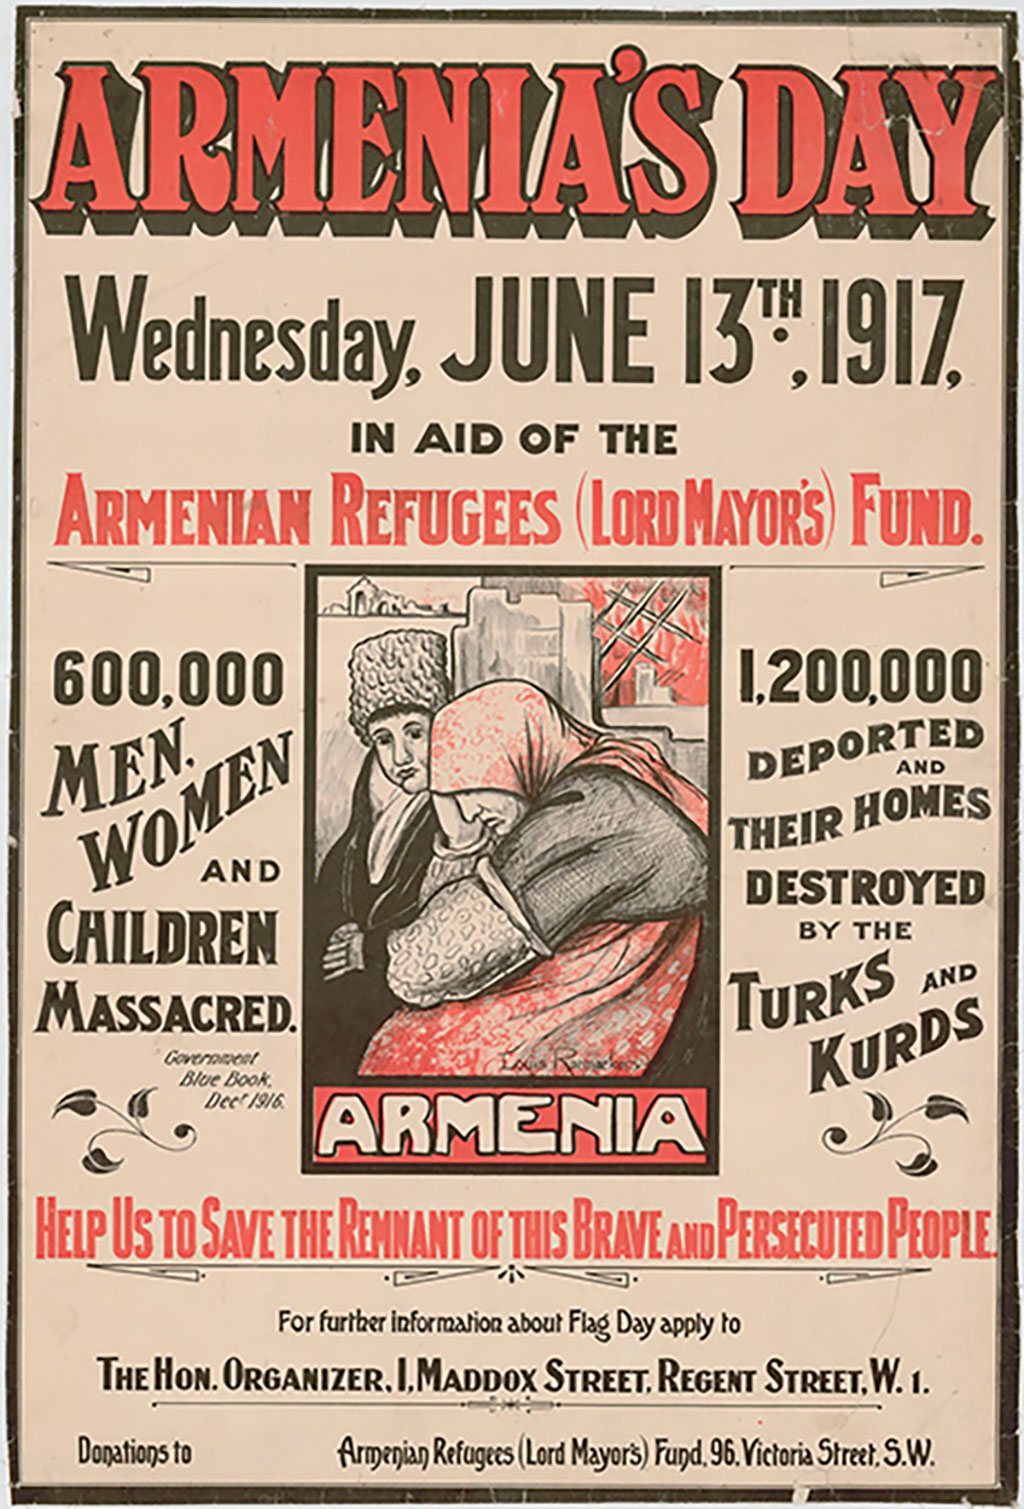 A poster showing Armenians Day celebration date and time, there is a drawing of two ladies.